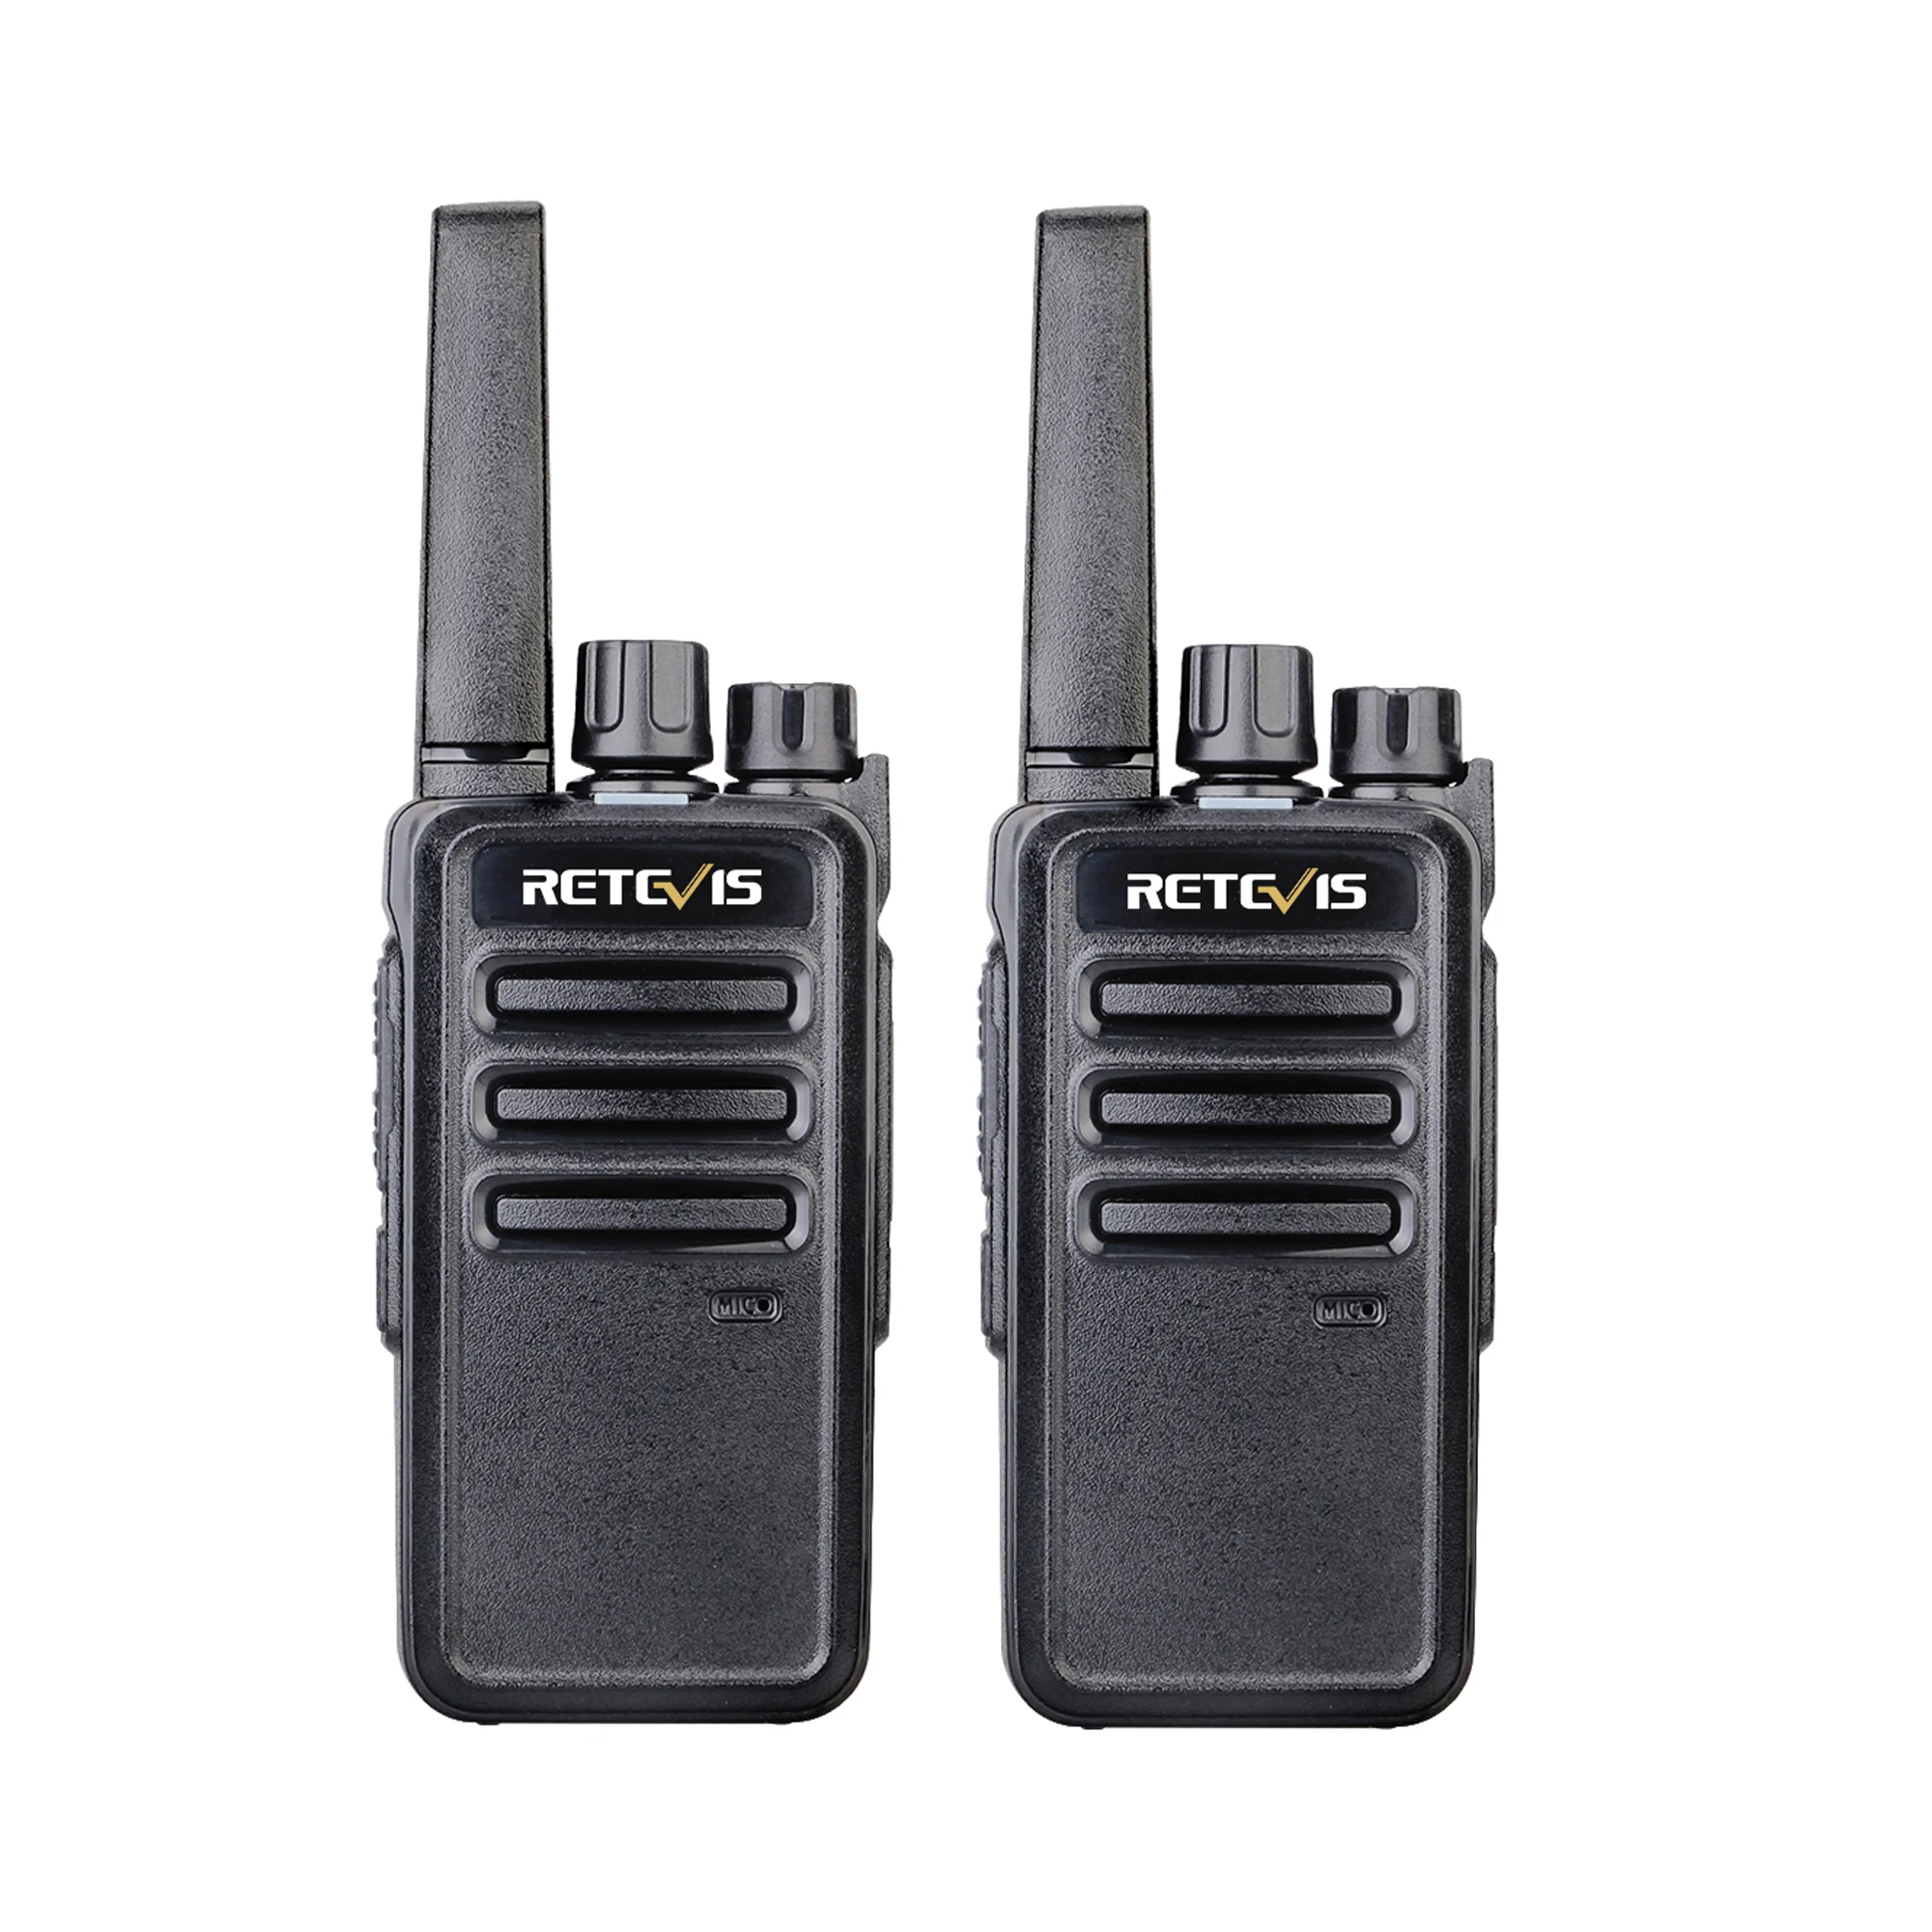 

2021 New walkie talkie Retevis RT668 0.5W license free PMR446 16CH CTCSS/DCS TOT VOX Scan Two Way Radio for storage wharf touris